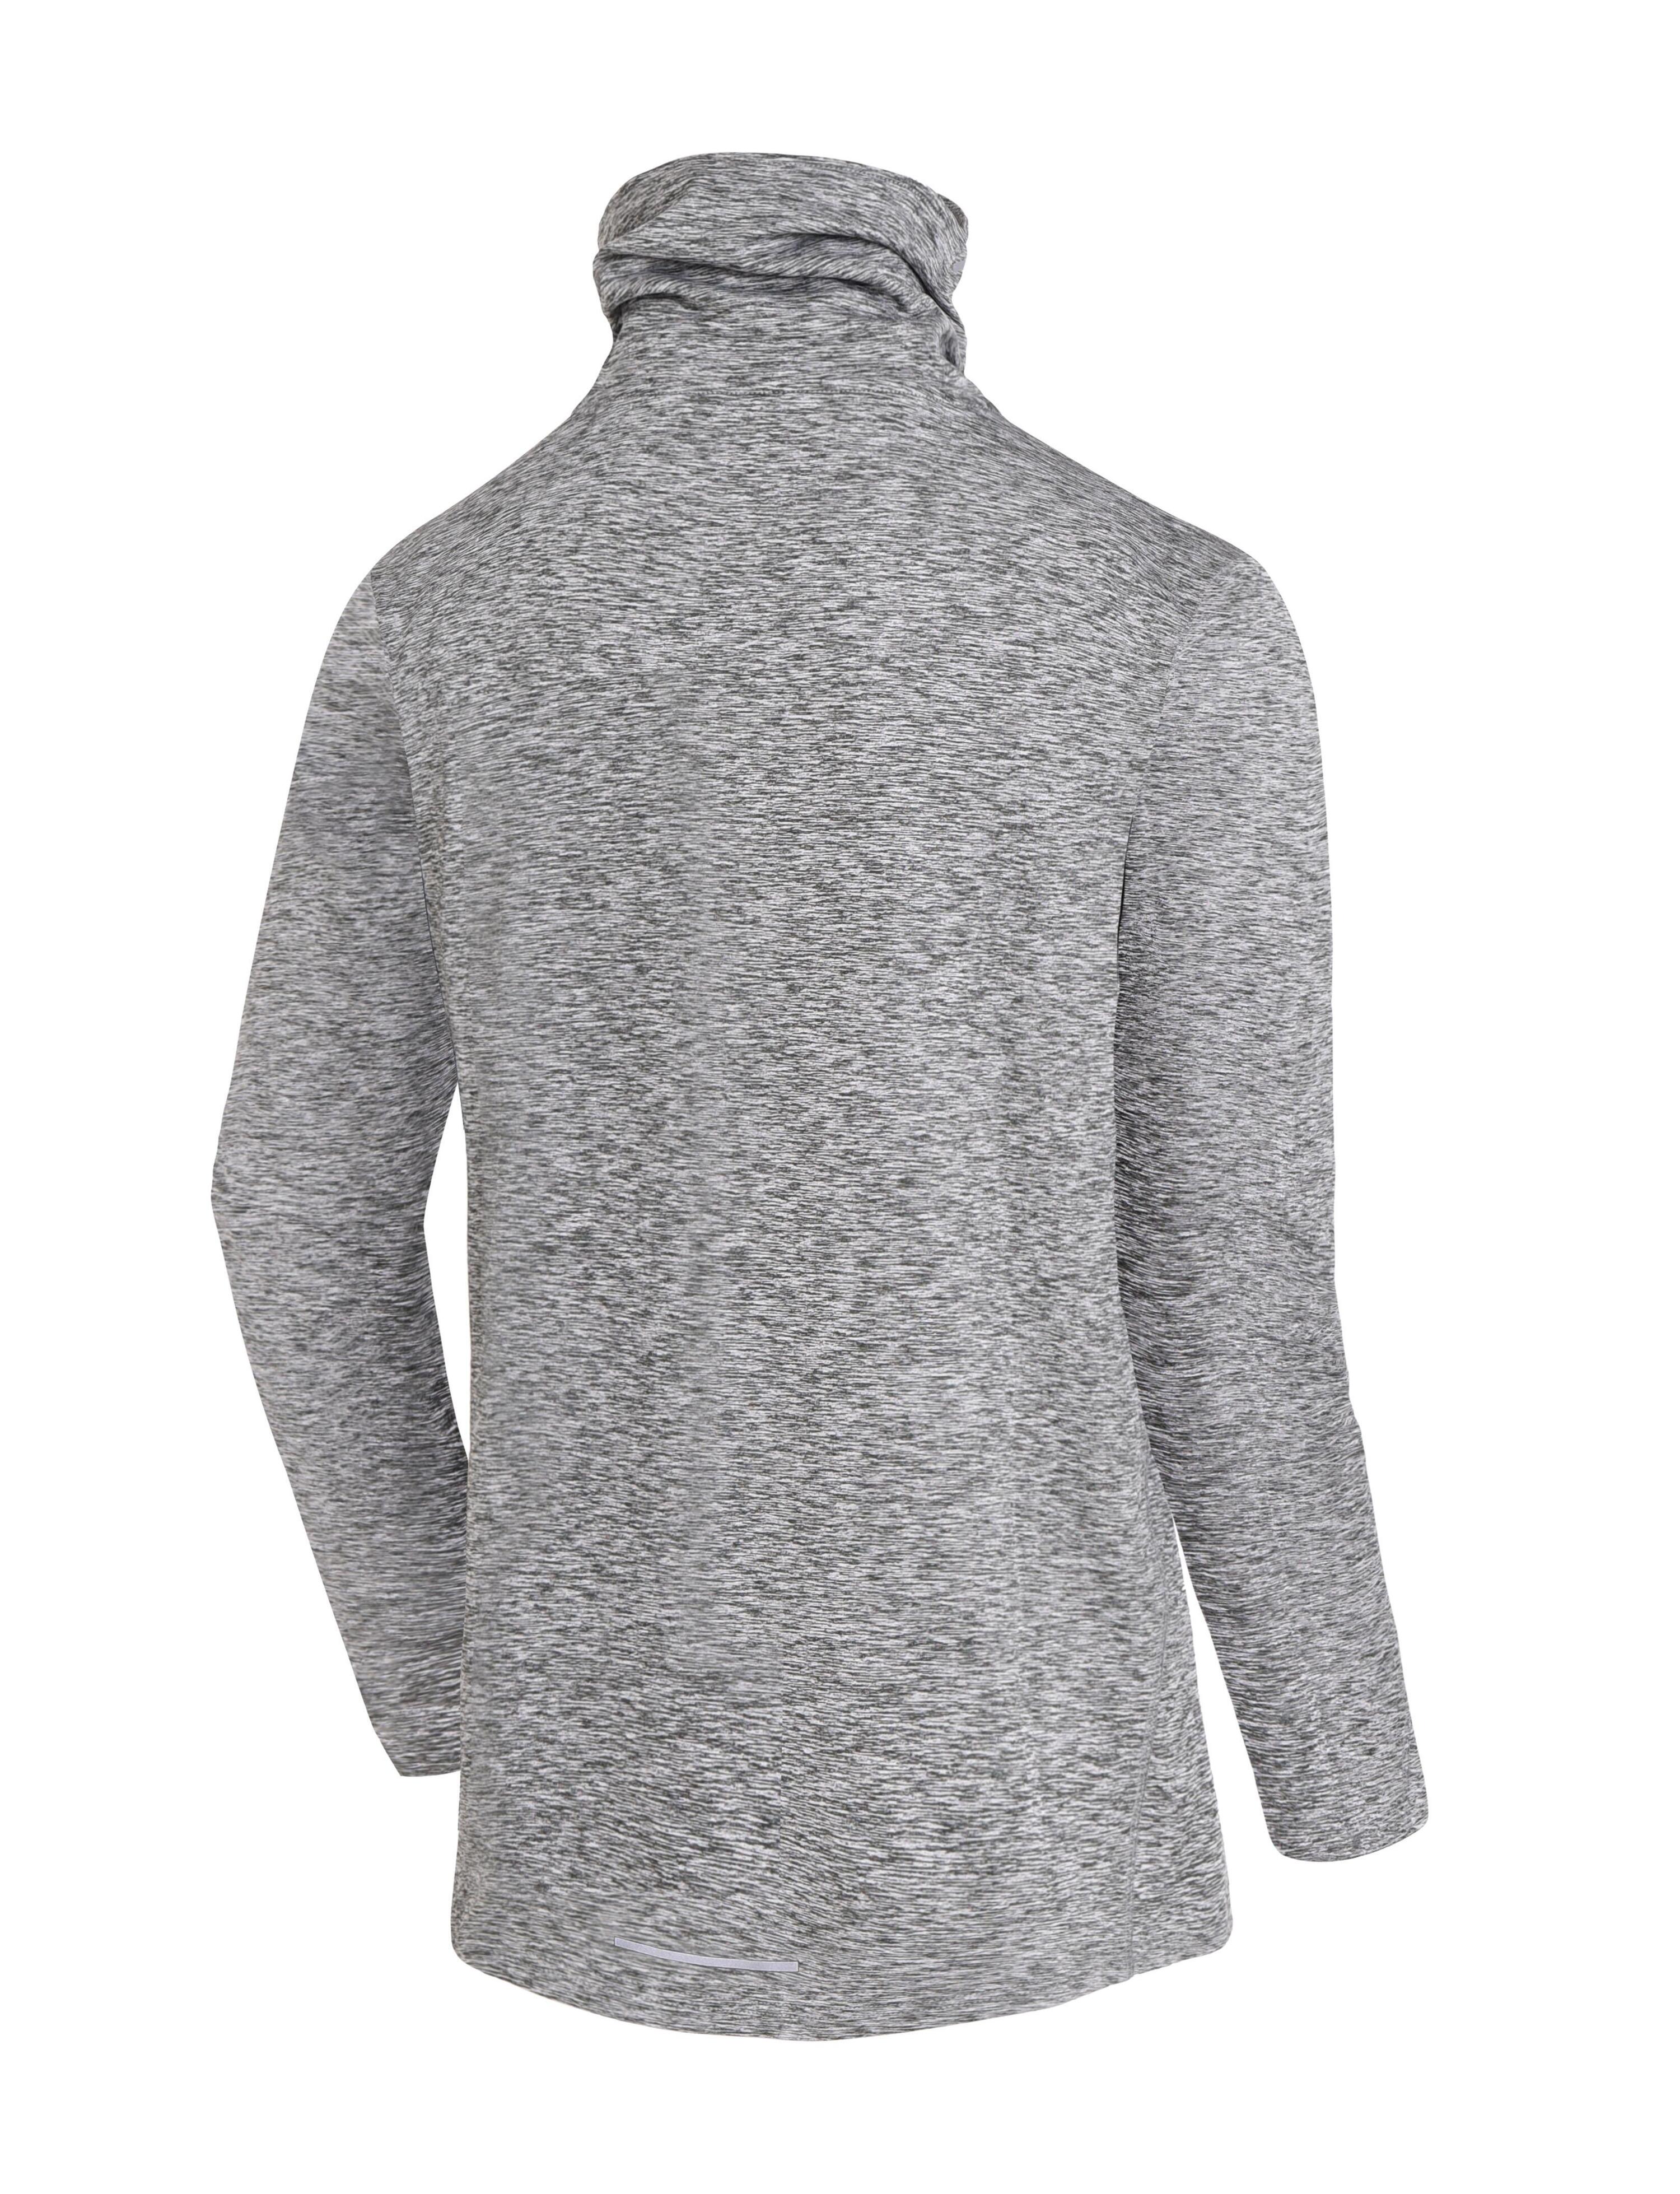 Boy’s Thermal Funnel Neck Top - Quiet Shade Marl 3/5